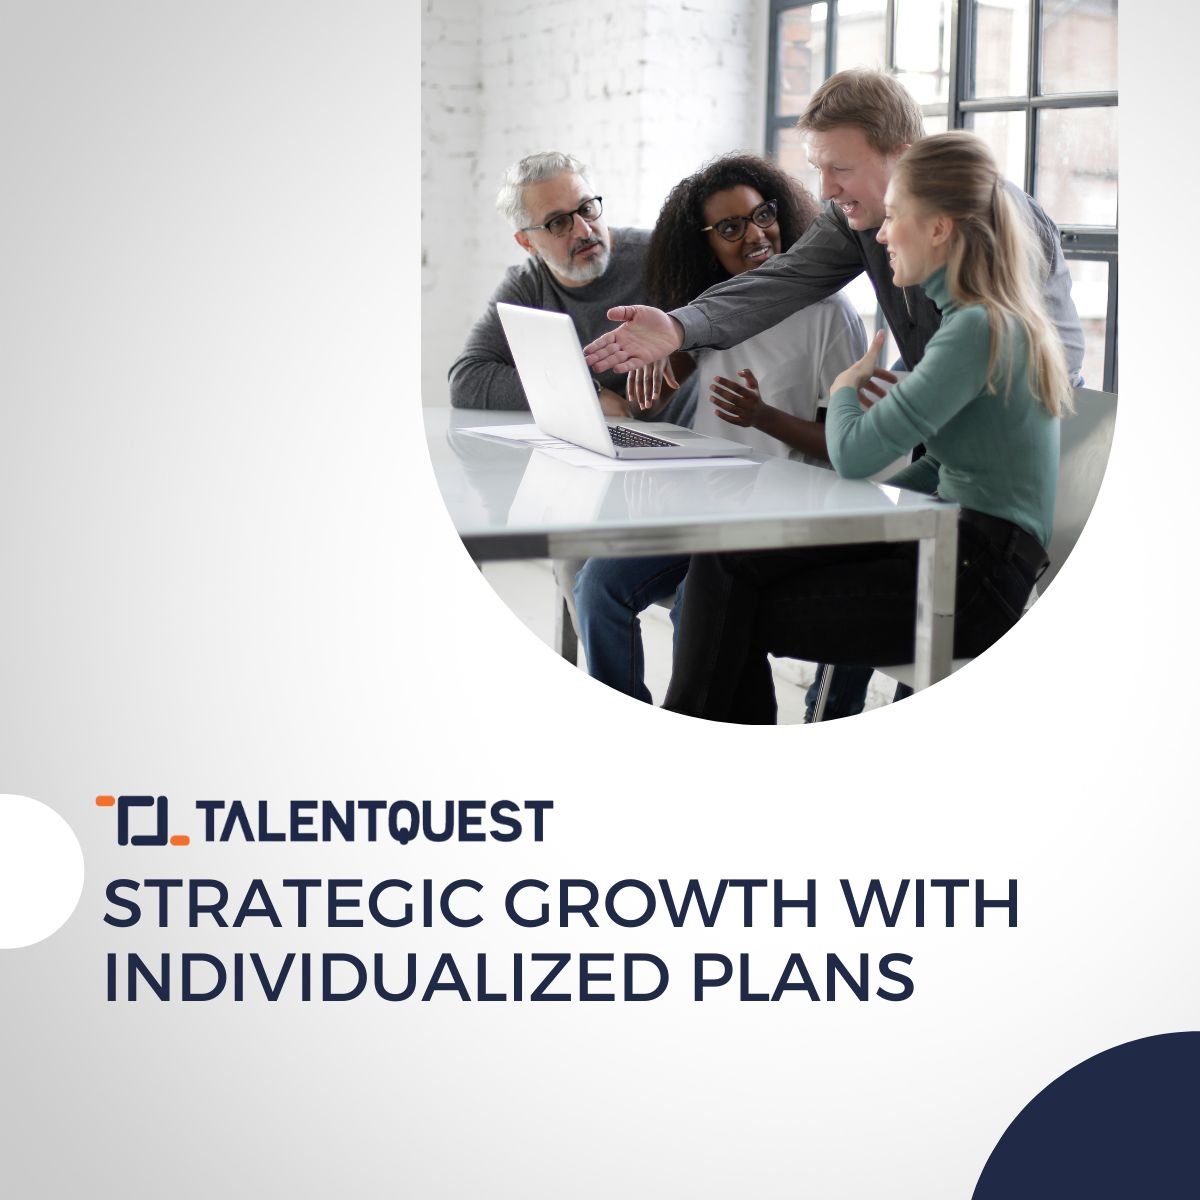 Strategic growth starts with individualized plans. Empower your team with tailored strategies, navigate challenges together and reach the summit of success. Leave no talent behind!

#TalentDevelopment #EmpowerEmployees #WorkforceEngagement #TalentManagement